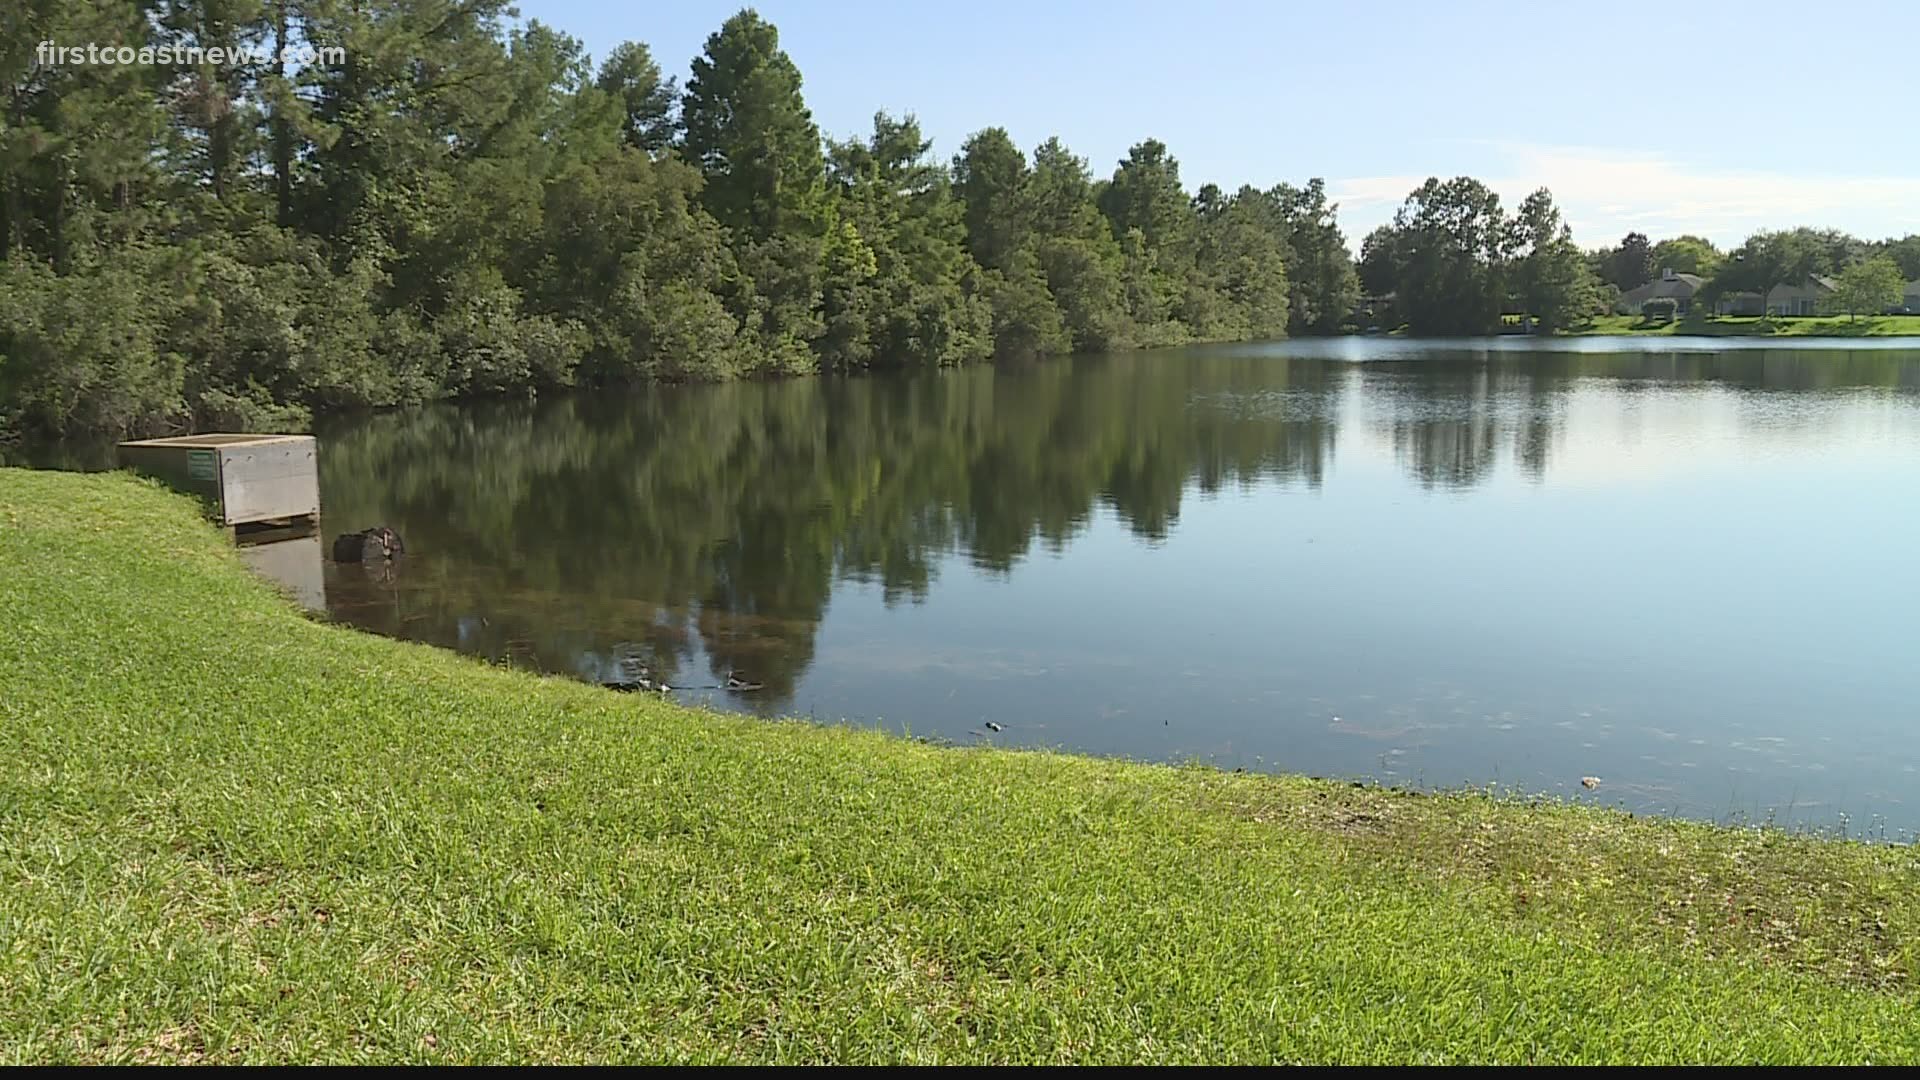 Earlier Monday, a 4-year-old girl drowned in a retention pond on Jacksonville's Westside.